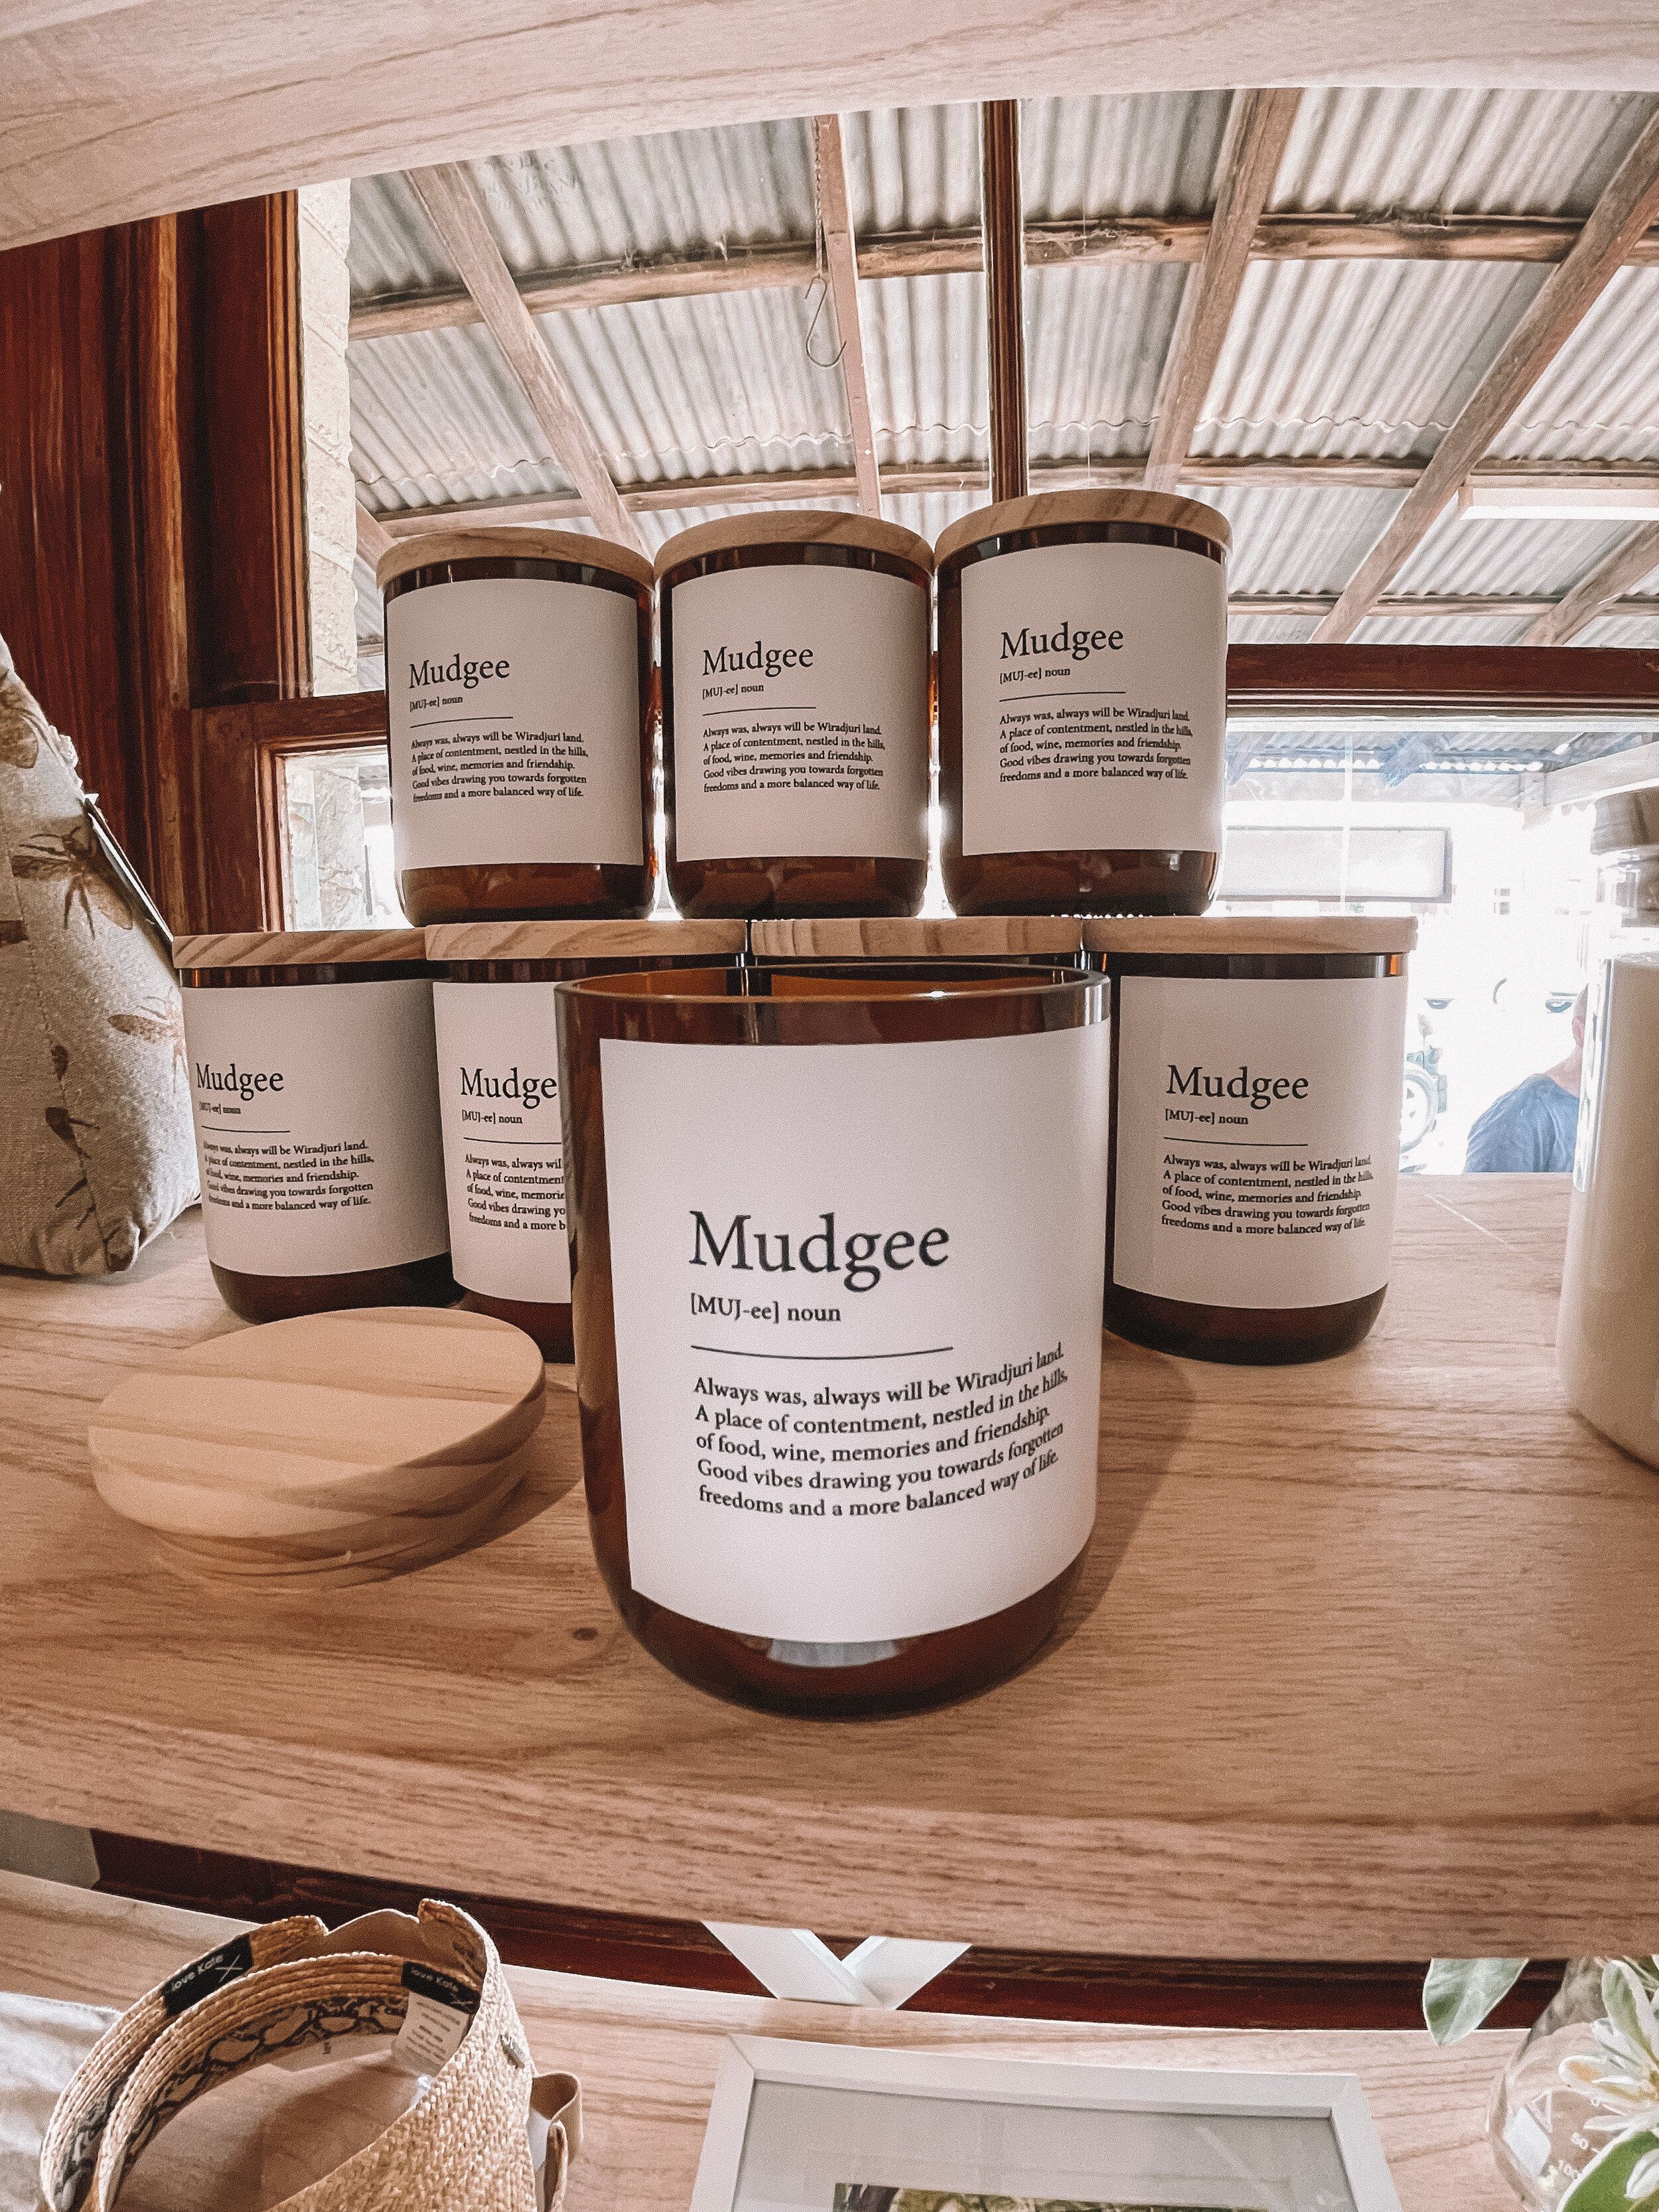 Mudgee scented candle - Mudgee - New South Wales (NSW) - Australia